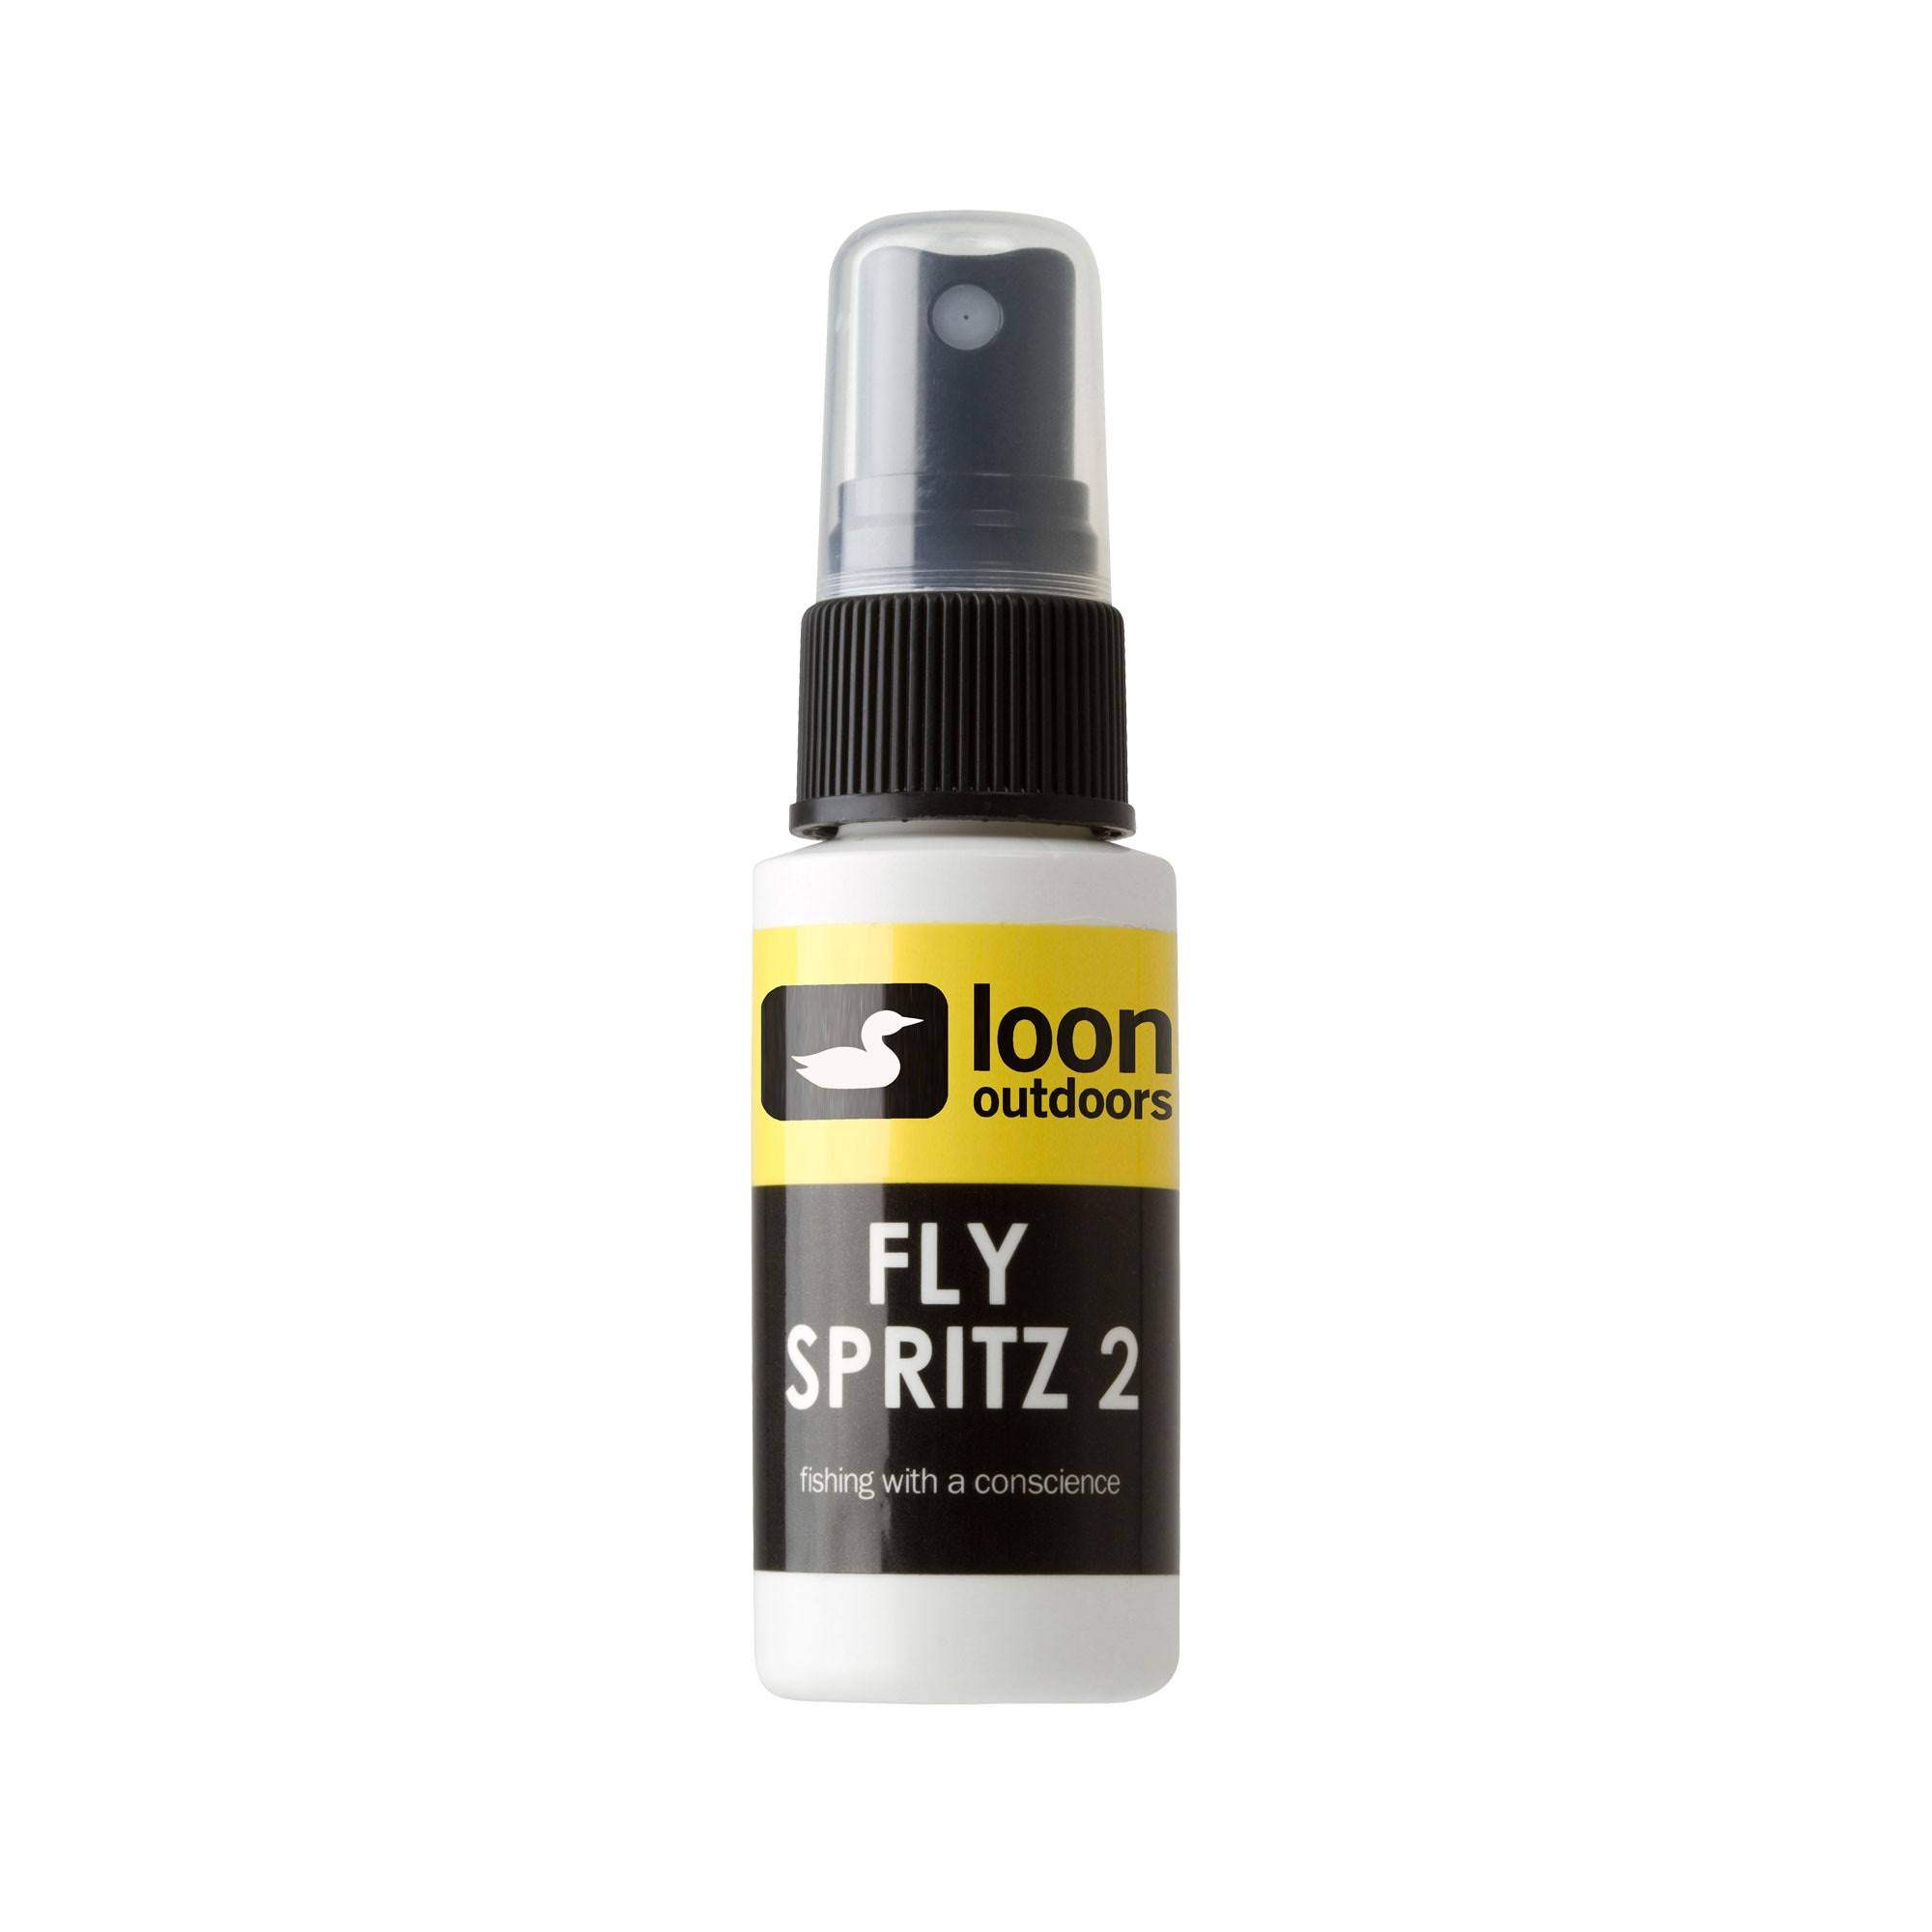 Loon Fly Spritz 2 Water Base Floatant Dry Fishing Fly Dressing Pump Spray